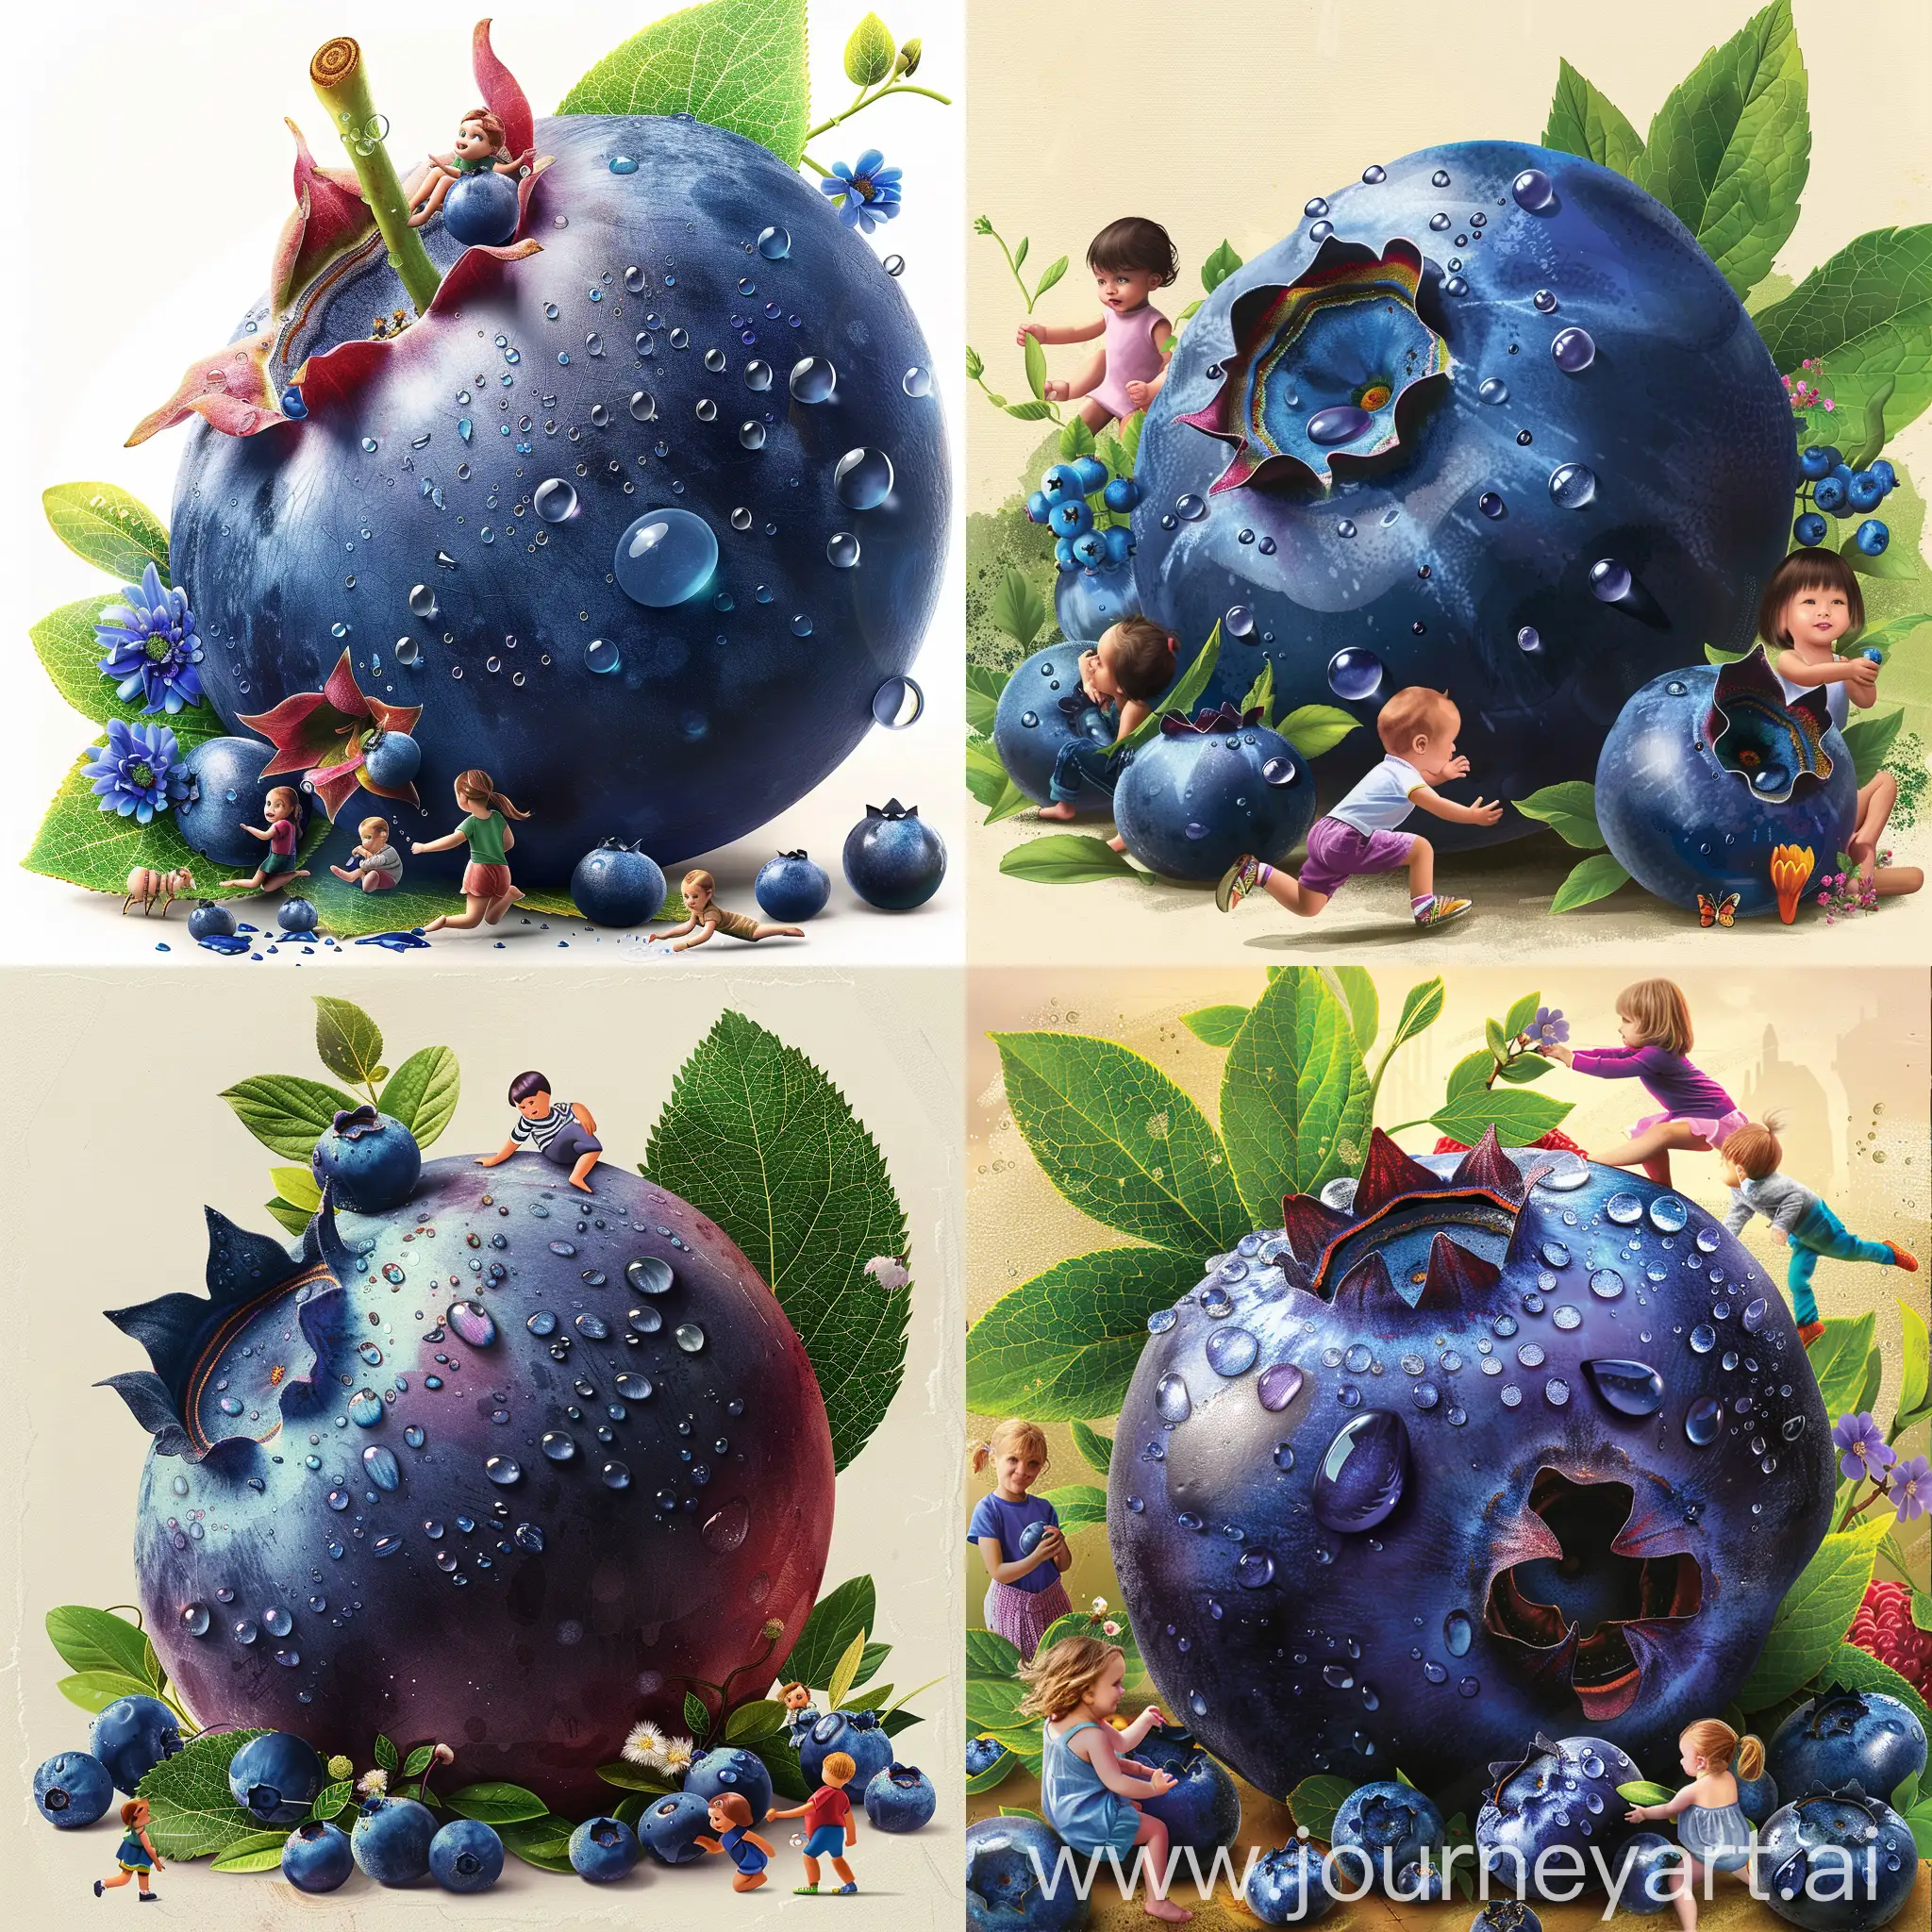 An oversized blueberry fruit, presented vividly and full, with some dewdrops on the fruit, around this blueberry, some children playing, using blueberry leaves and flowers as decorations, warm and vivid colors, the design style is both modern and childlike